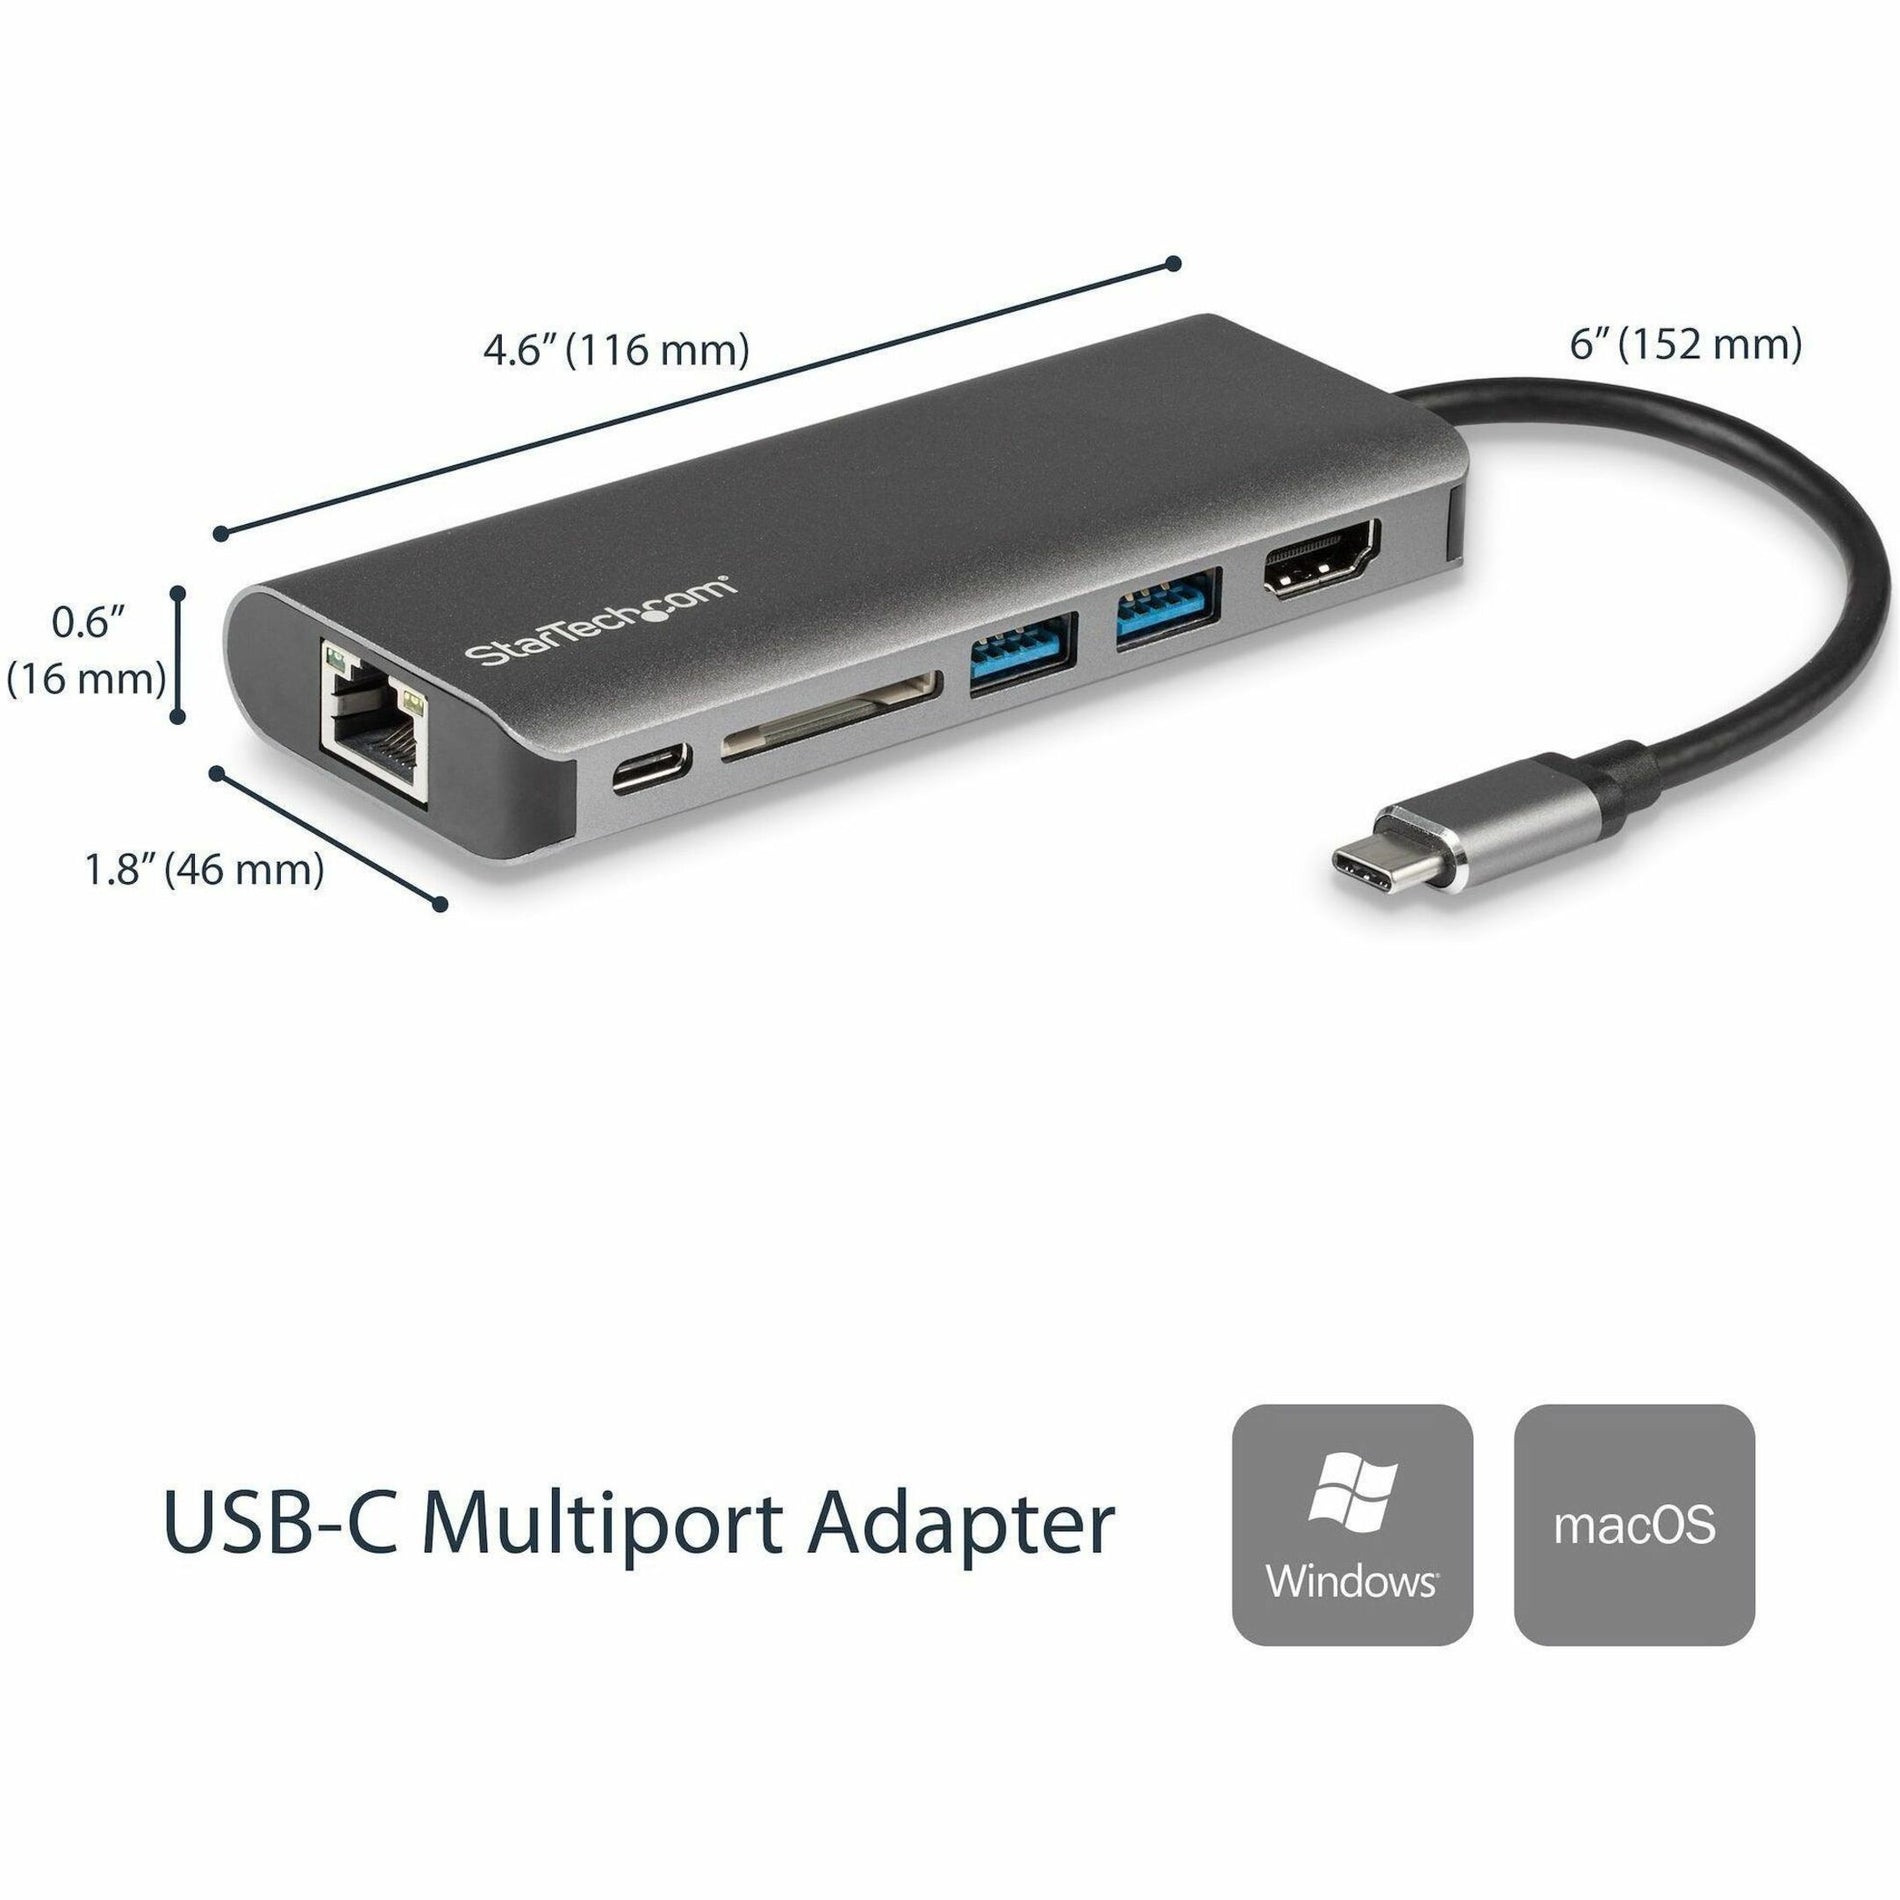 StarTech.com DKT30CSDHPD USB-C Multiport Adapter with SD Card Reader, Power Delivery, 4K HDMI, GbE, 2 x USB 3.0 Ports, USB-C Hub